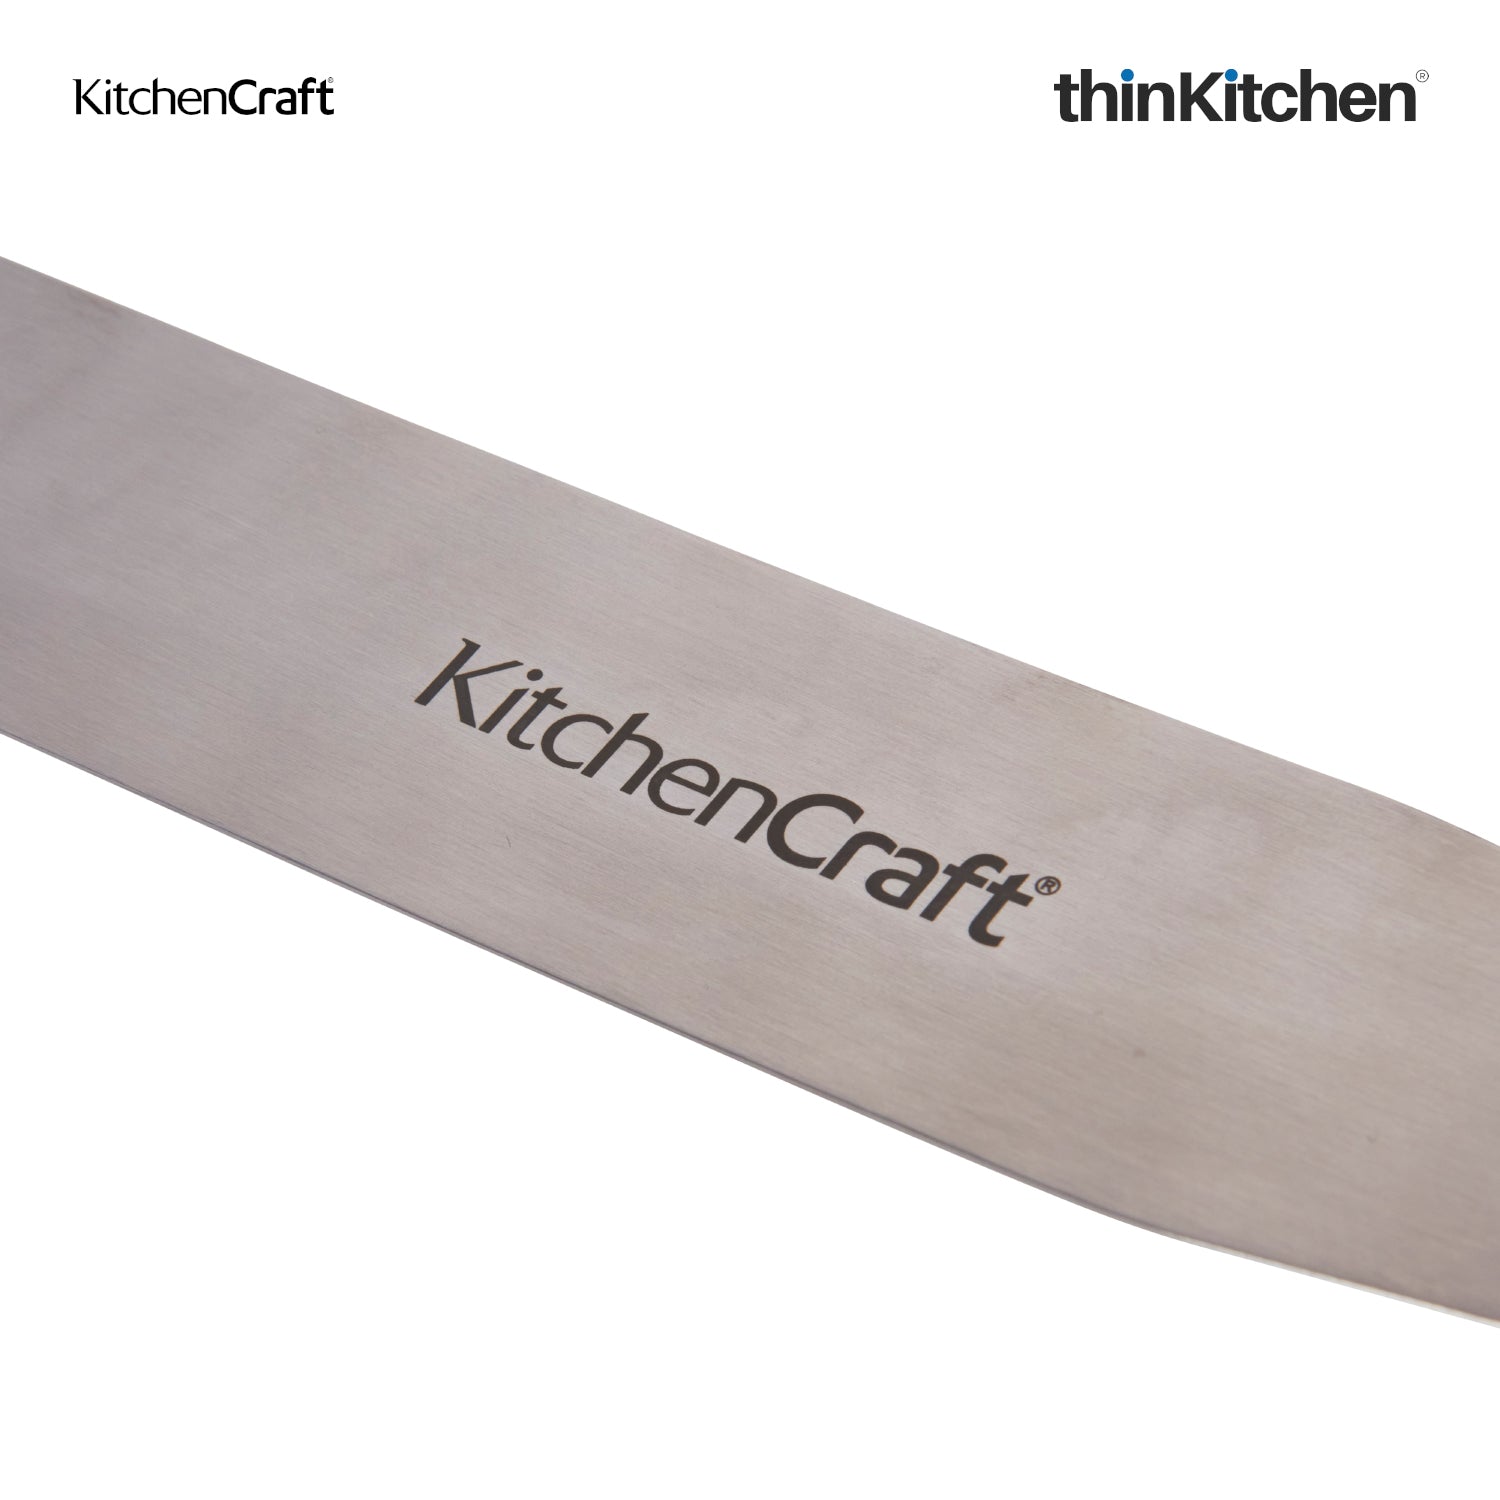  KitchenCraft Sweetly Does It Palette Knives for Baking